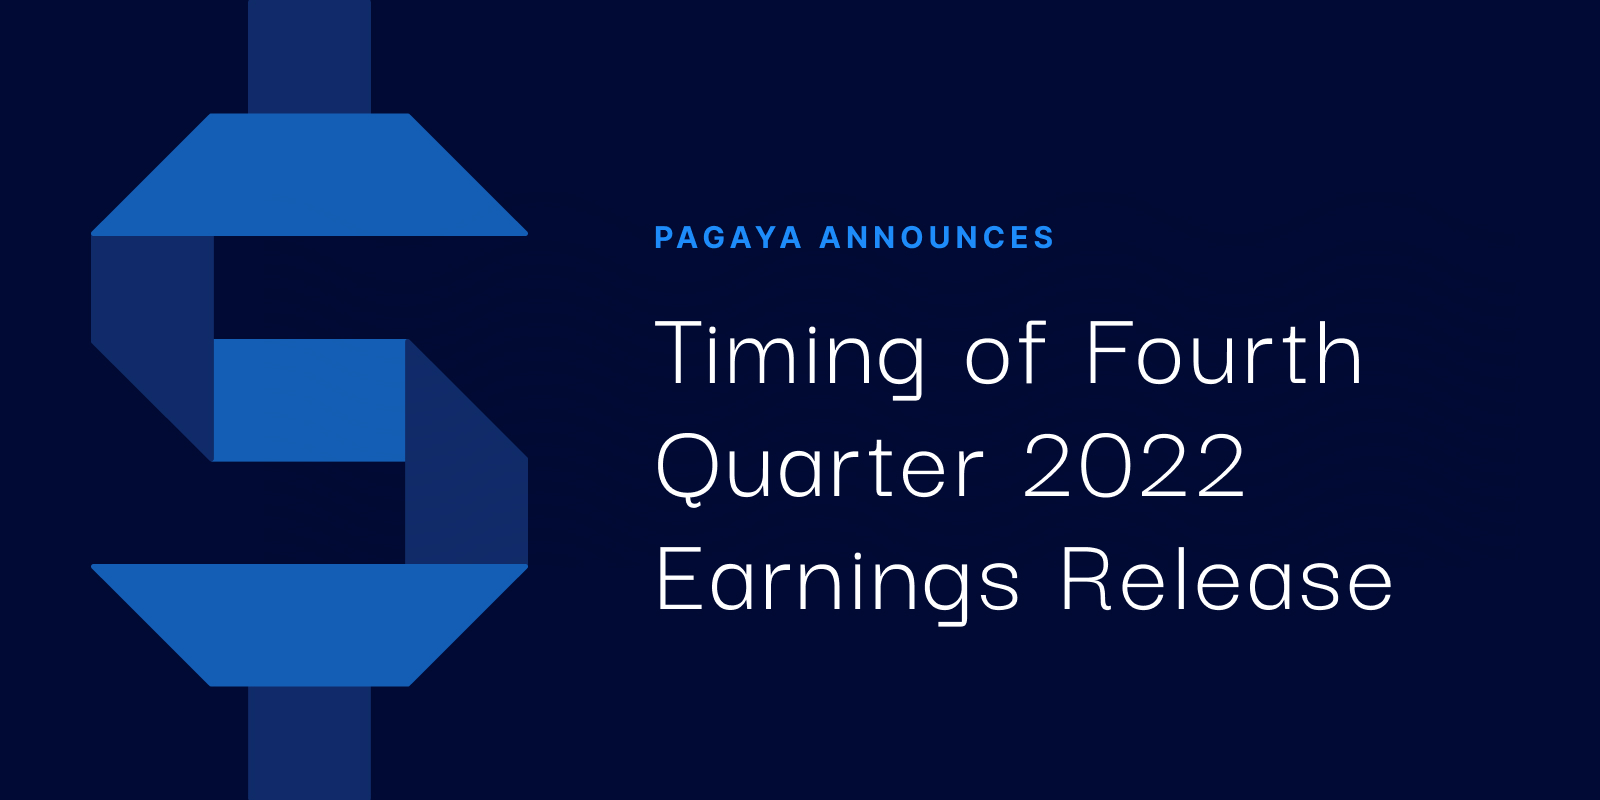 Blue background, blue dollar sign graphic, and text: Fourth Quarter 2022 Earnings Release